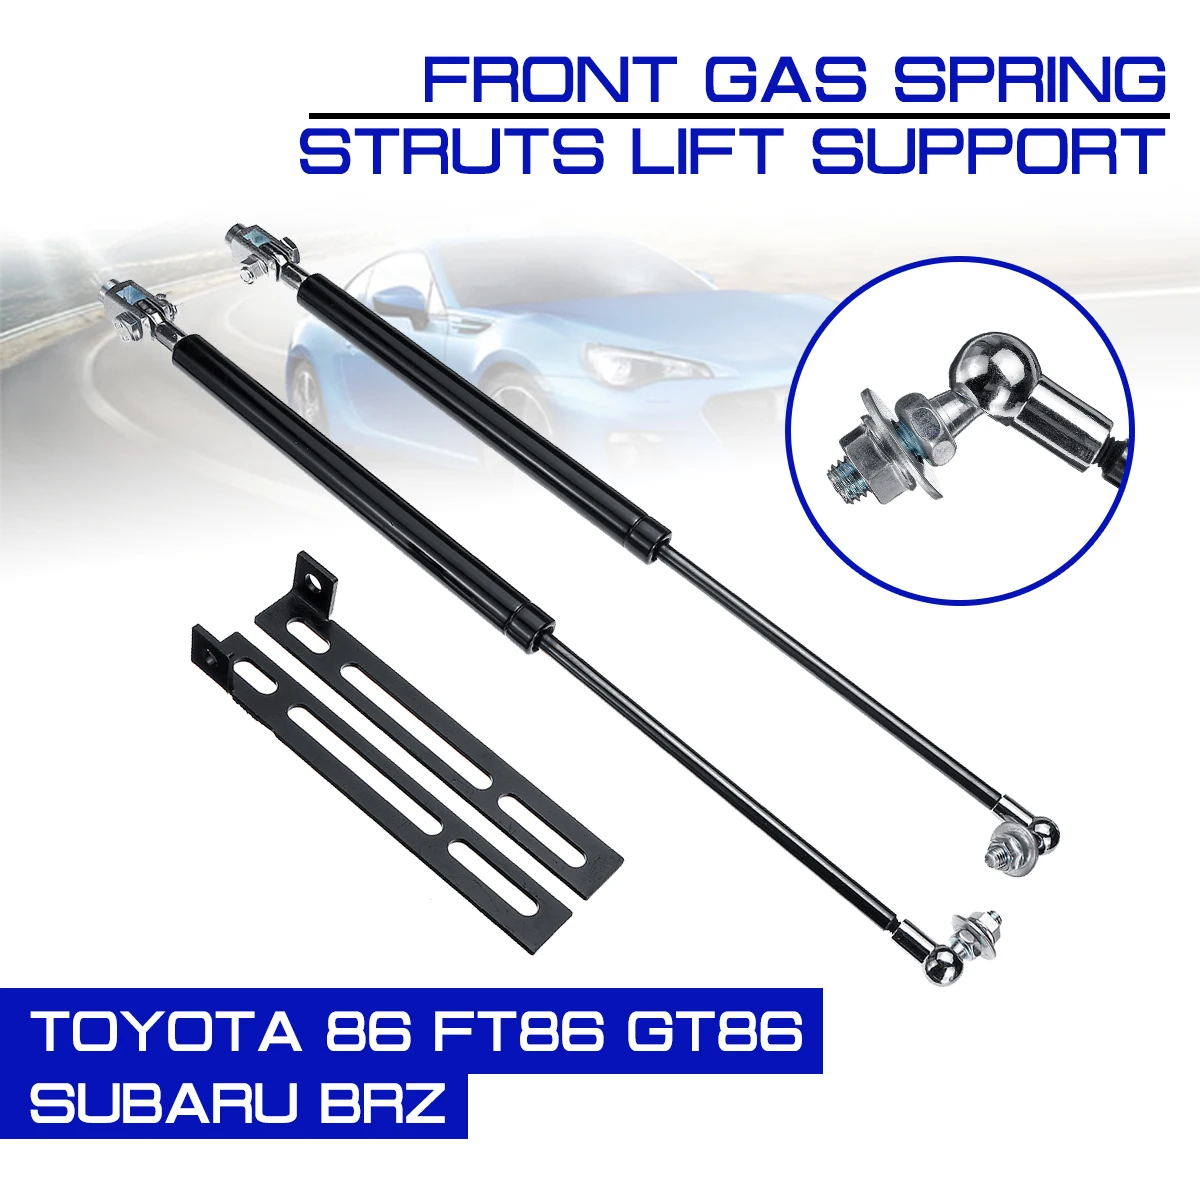 

Front Engine Cover Hood Shock Lift For Toyota 86 FT86 GT86 Subaru BRZ Scion FR-S Support Arm Rod Hydraulic Gas Spring Struts Bar